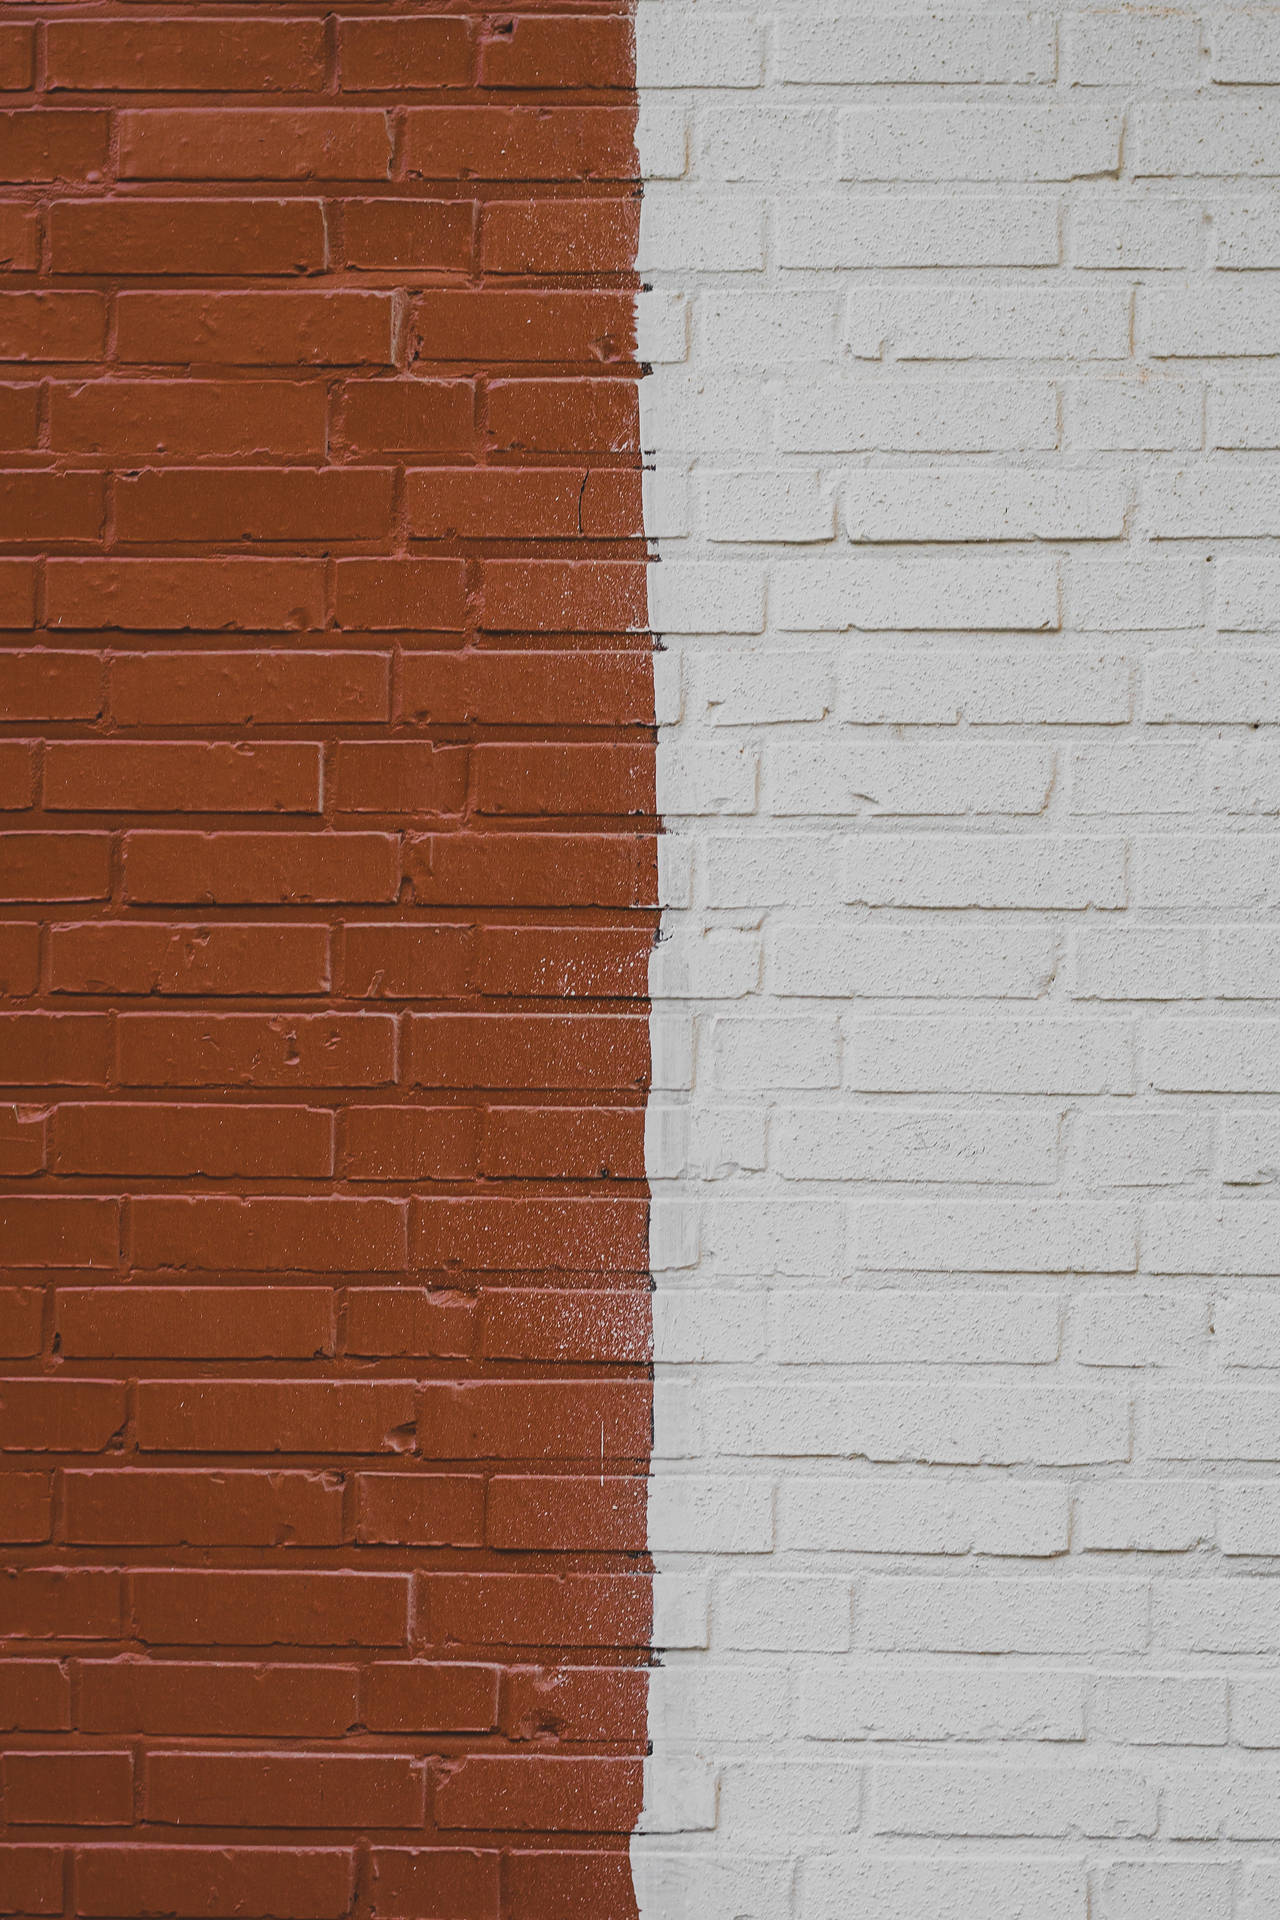 White Brick 3712X5568 Wallpaper and Background Image